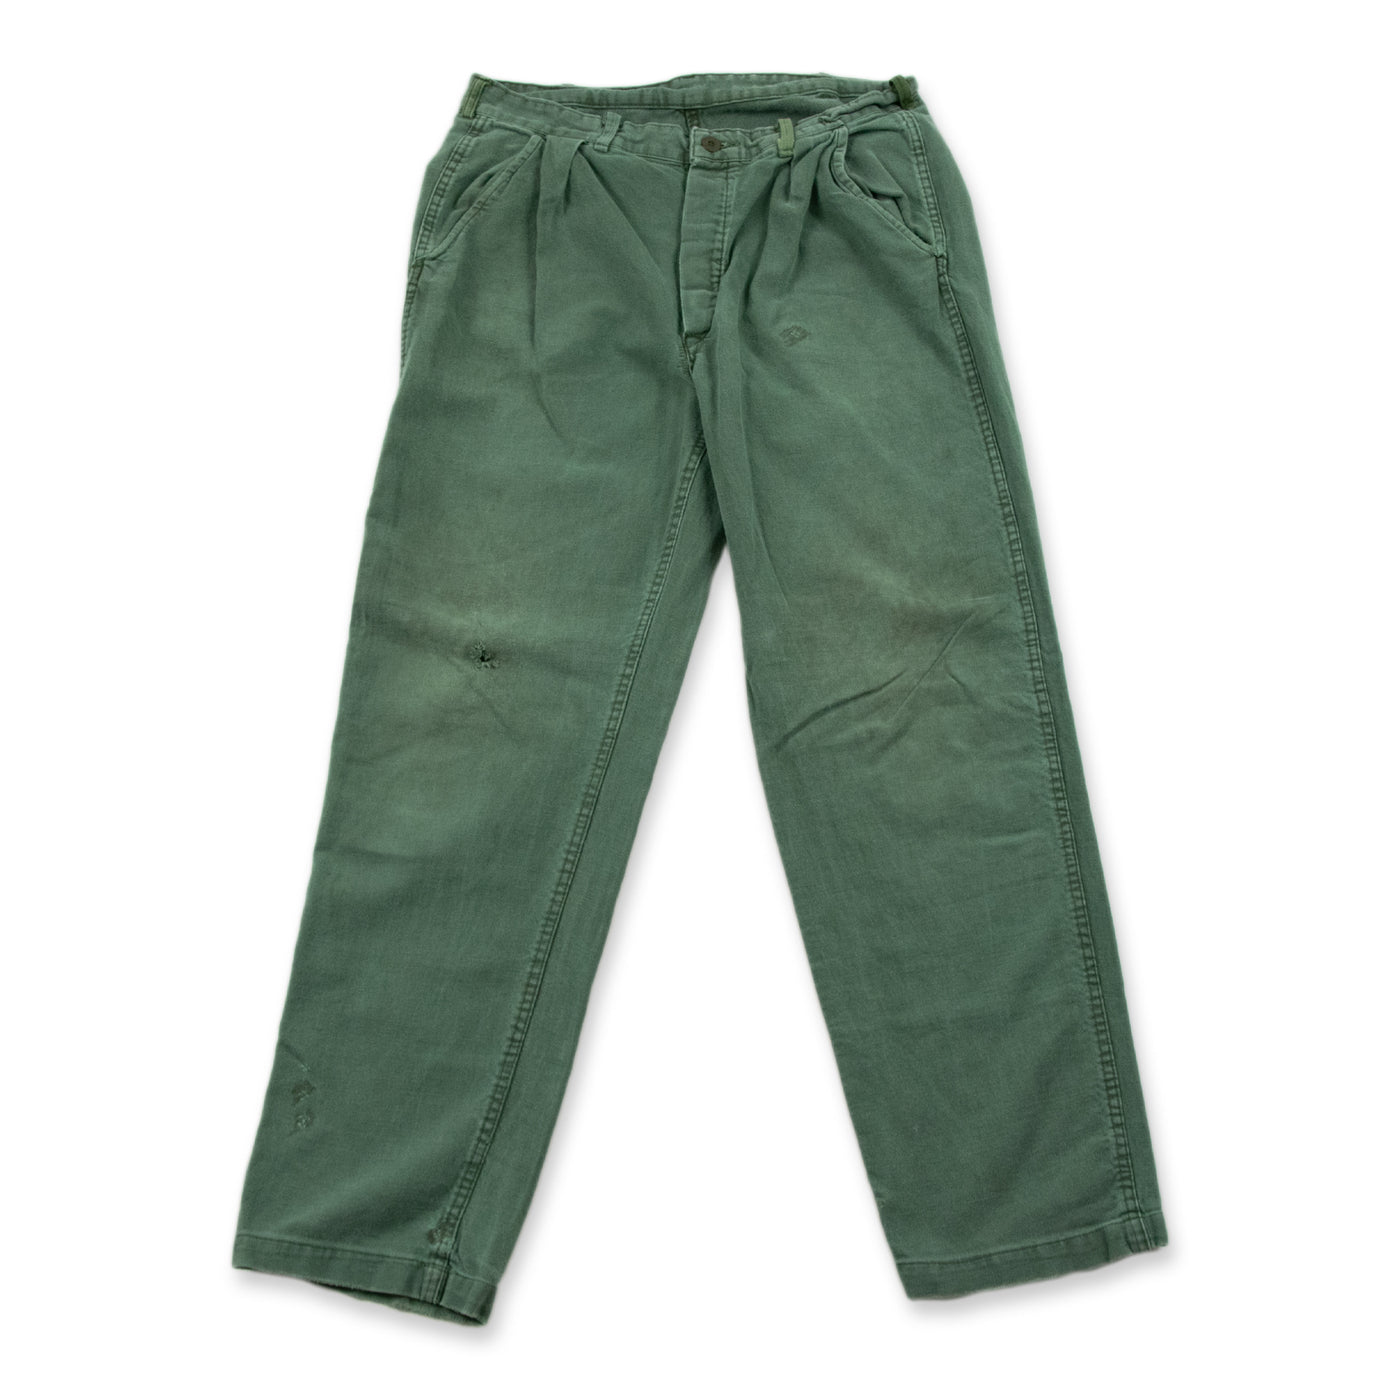 Vintage 70s Distressed Swedish Military Field Trousers Worker Style Green 30 W FRONT 